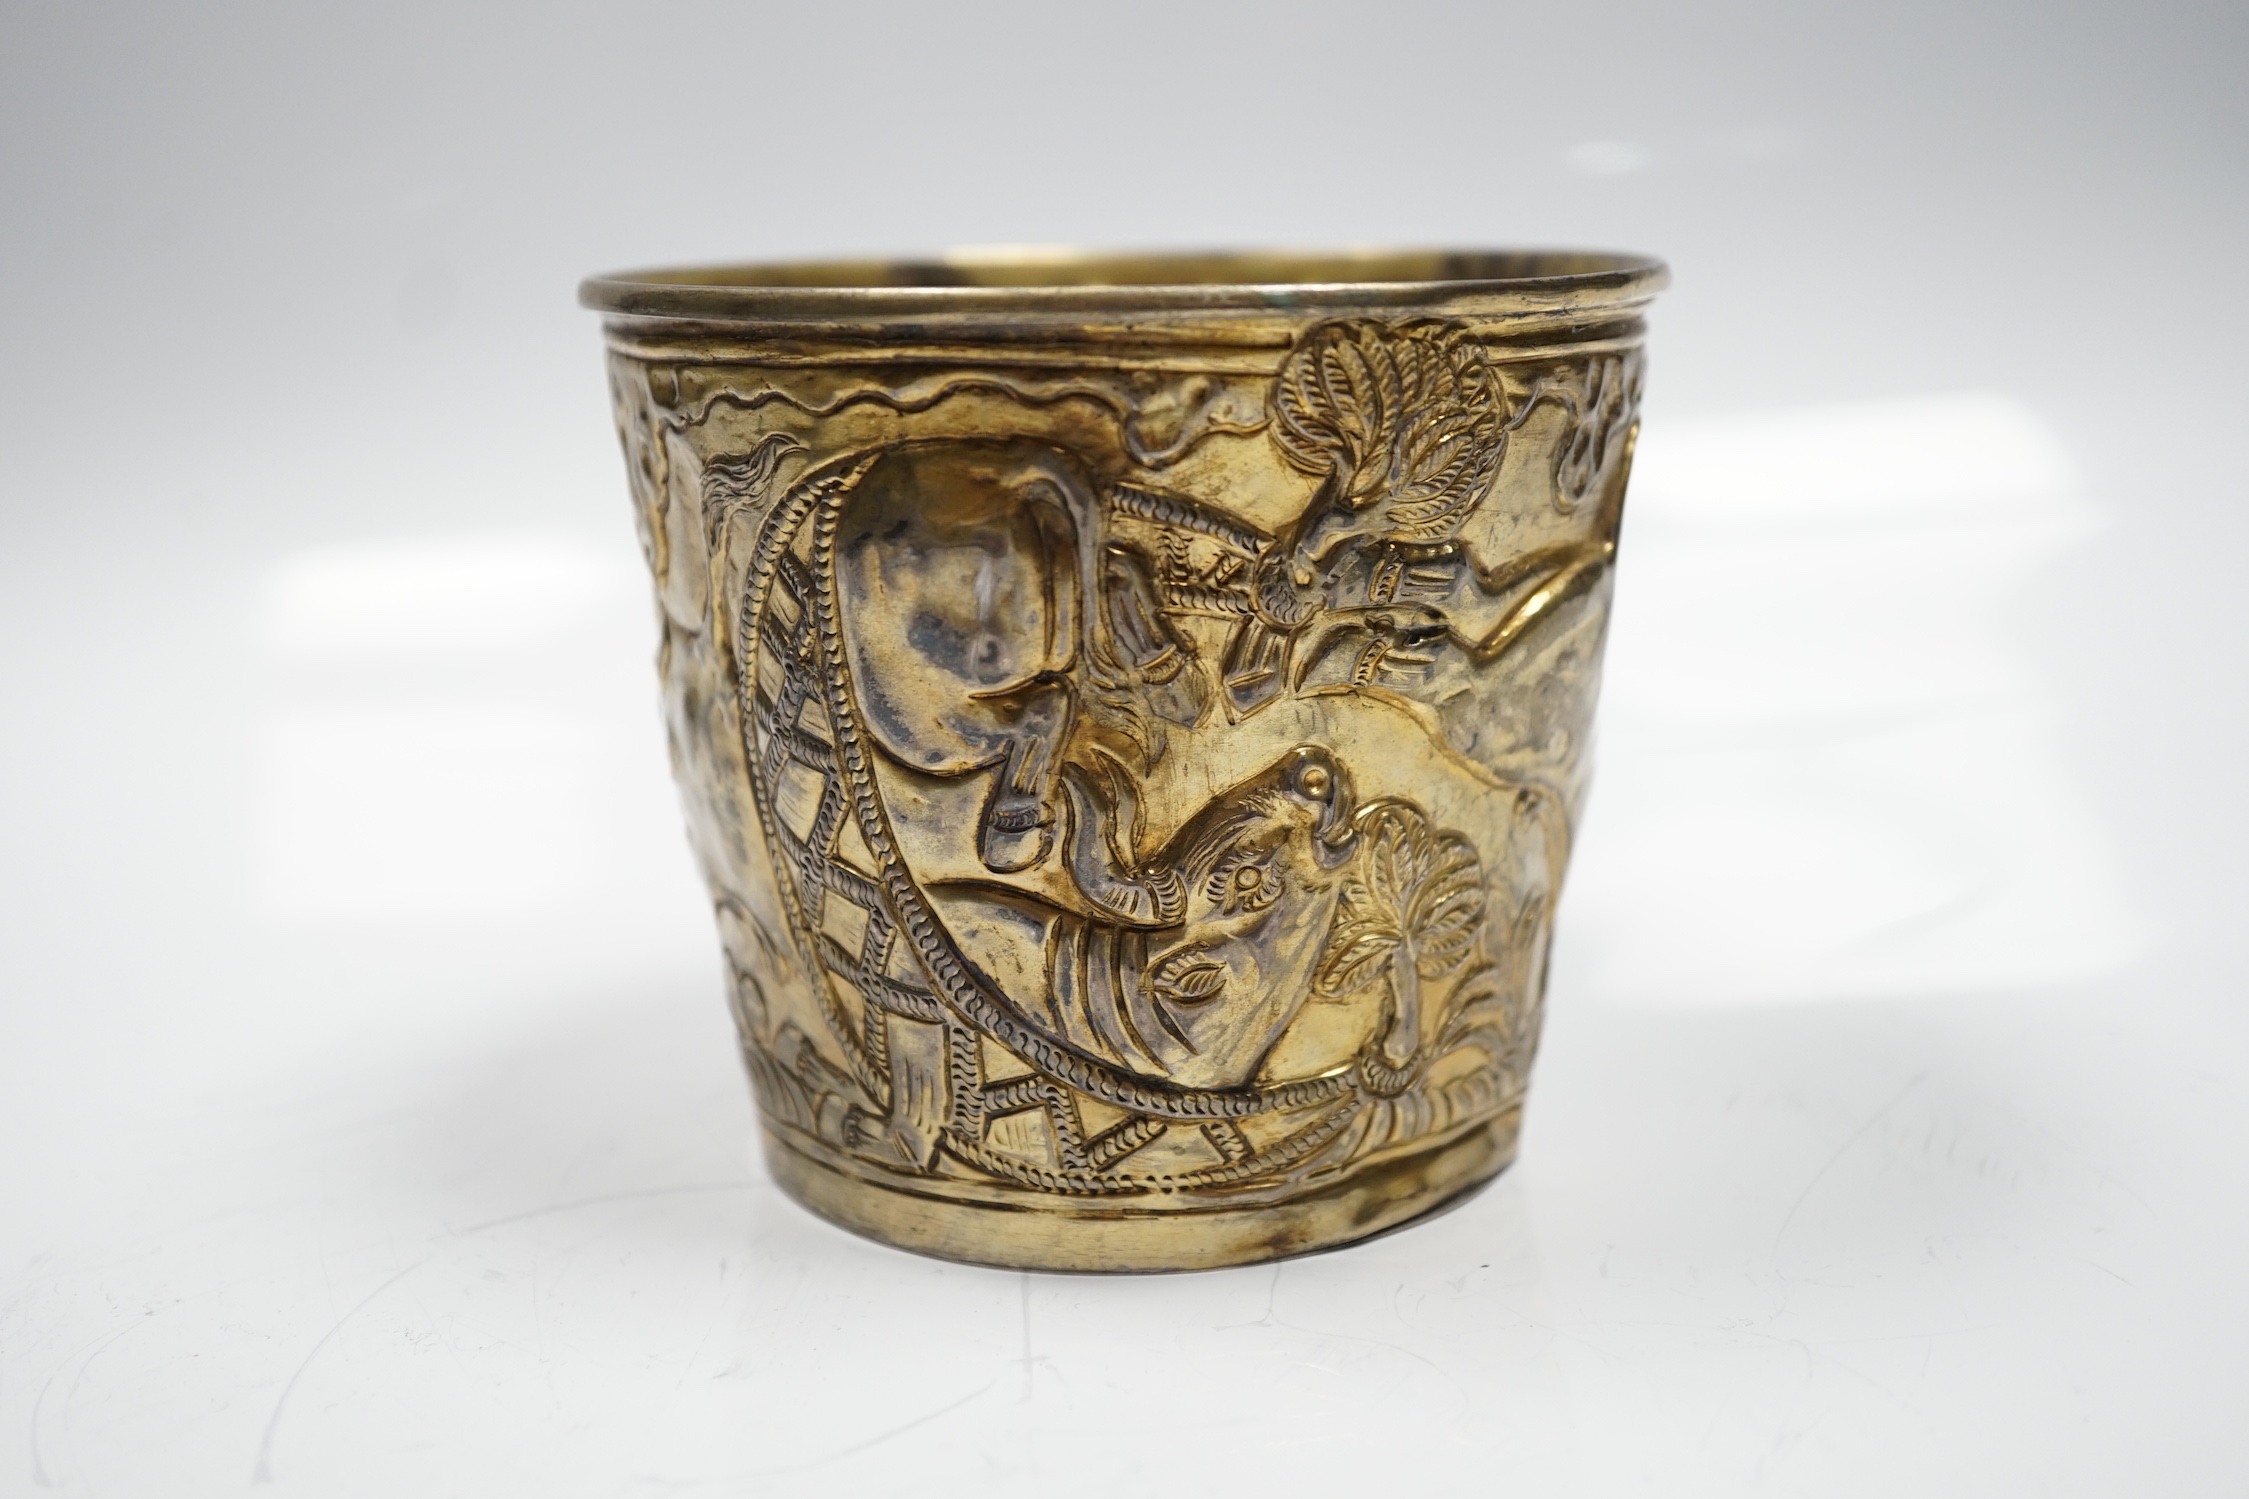 A Greek Lalaounis 900 standard gilt white metal, cup, embossed with continuous raging bull scene, height 90mm, 6.5oz.